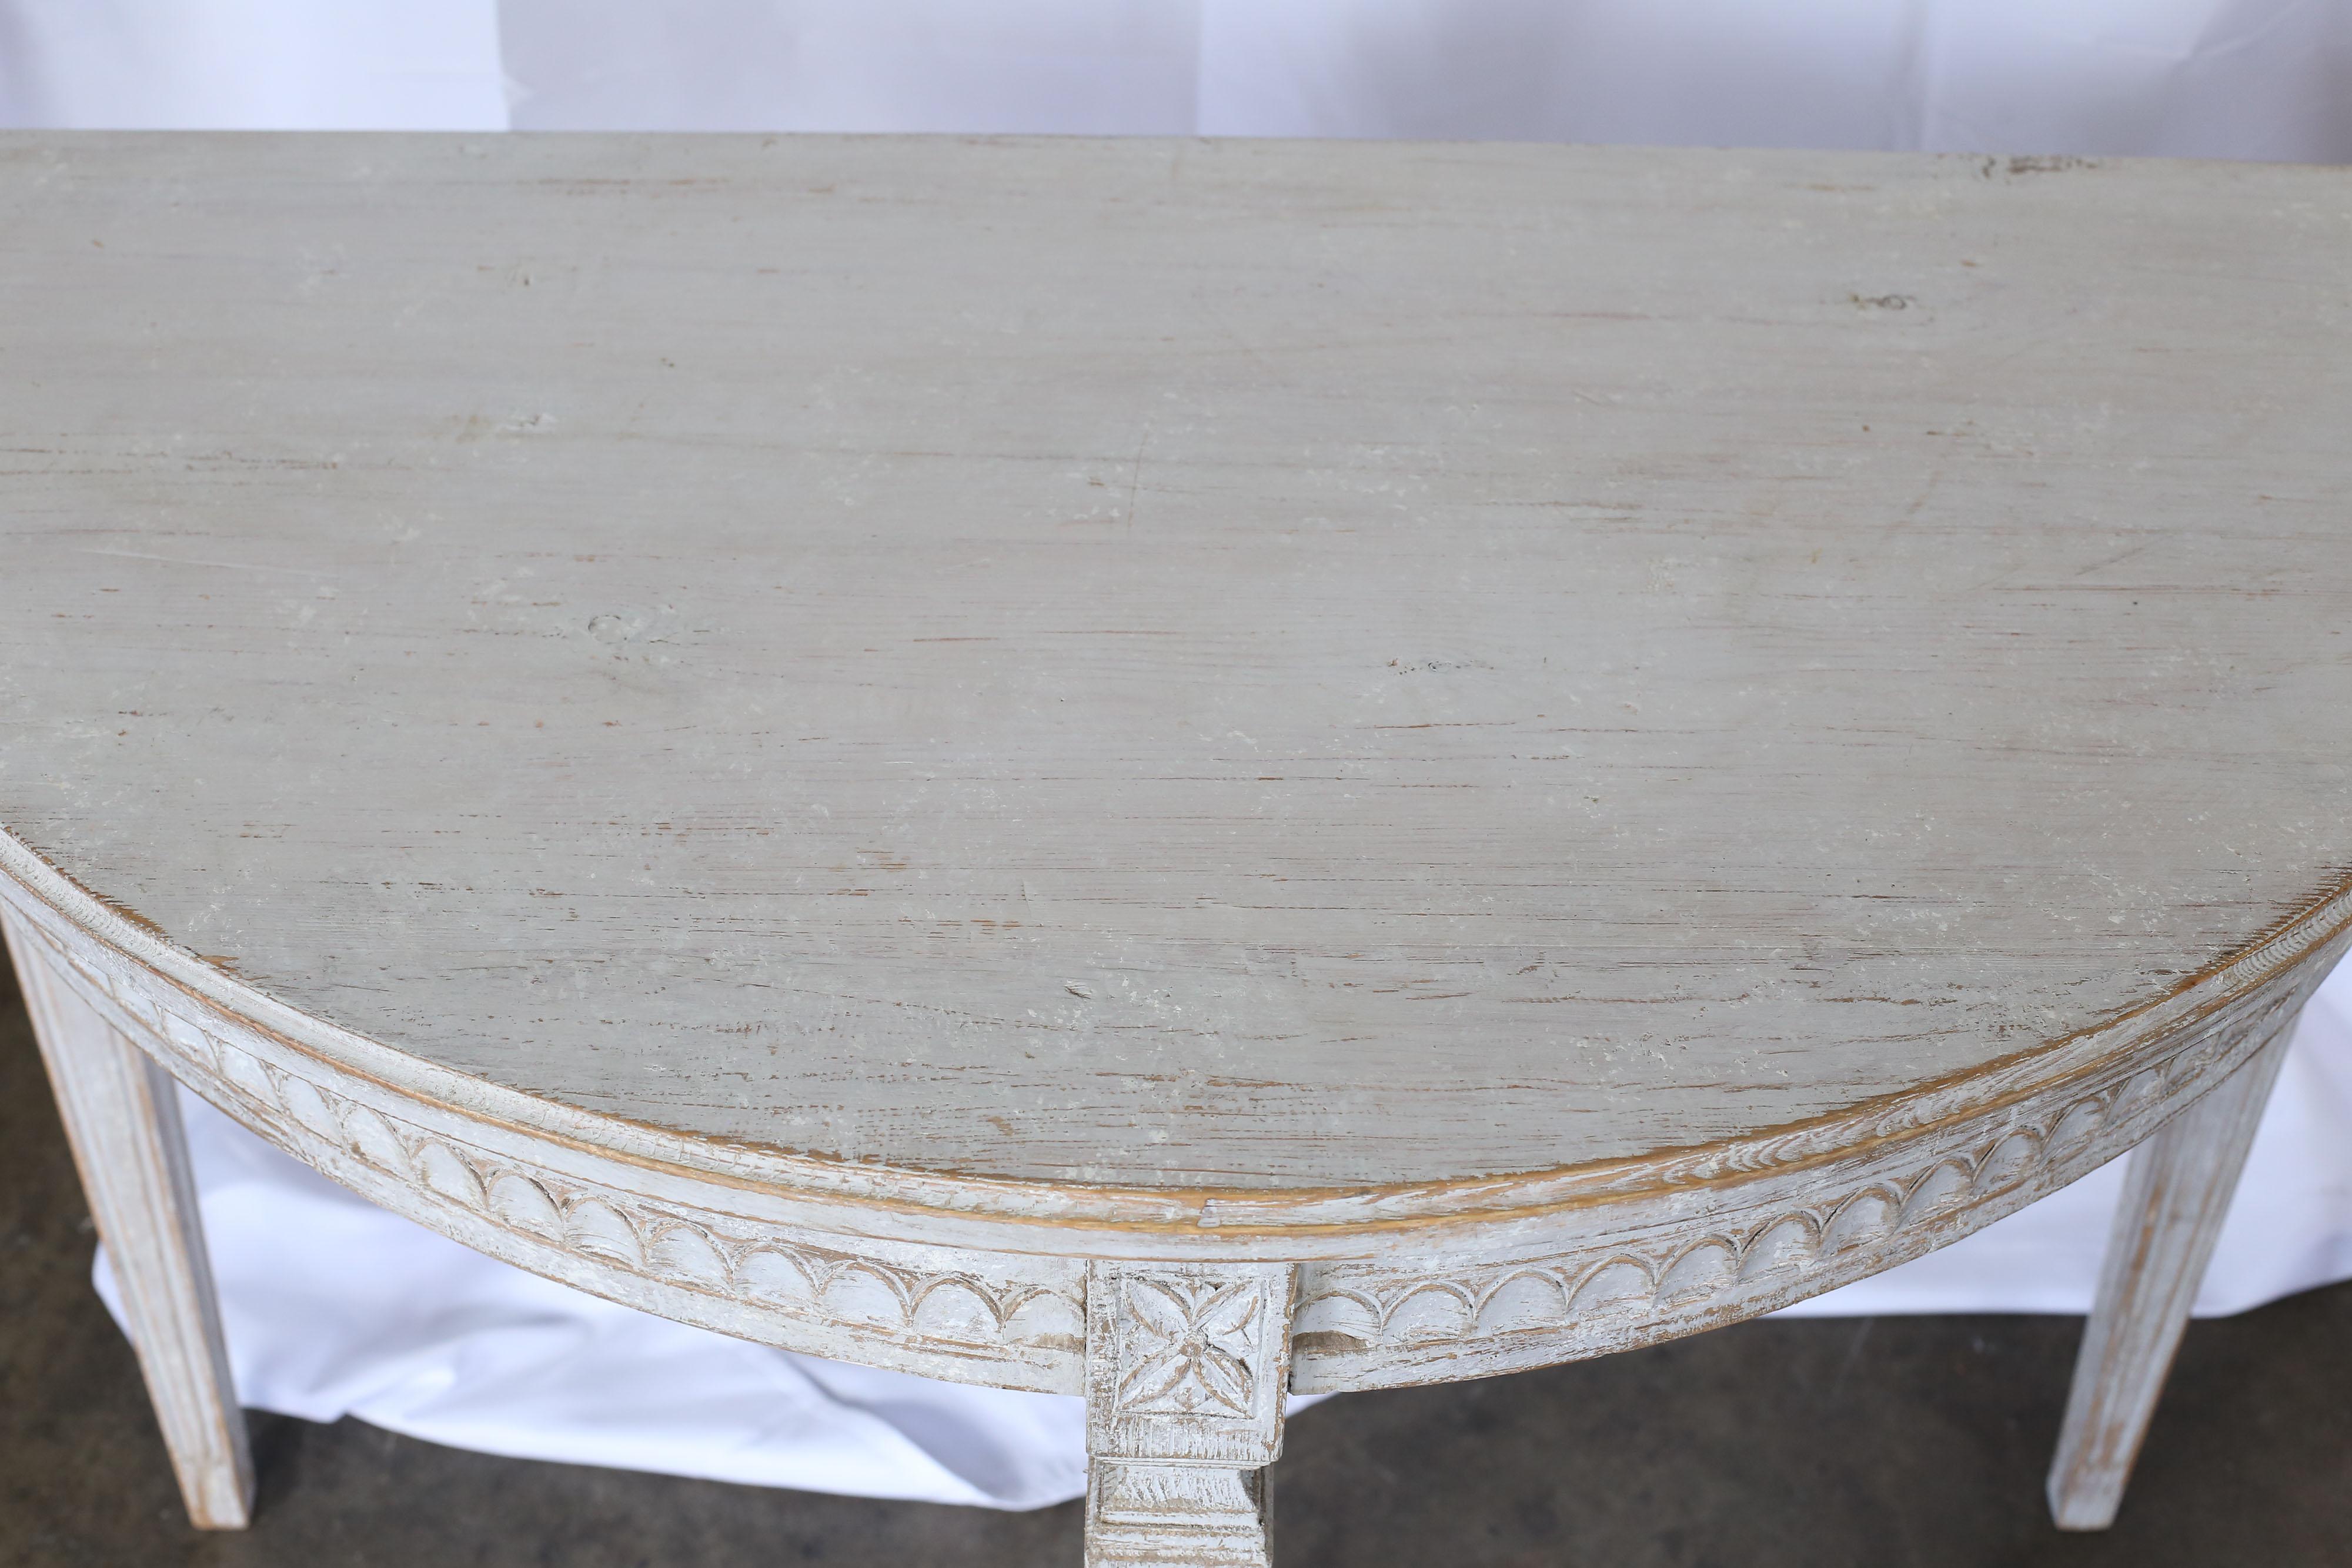 Austrian Pair of 19th Century Swedish Gustavian Demilune Tables For Sale